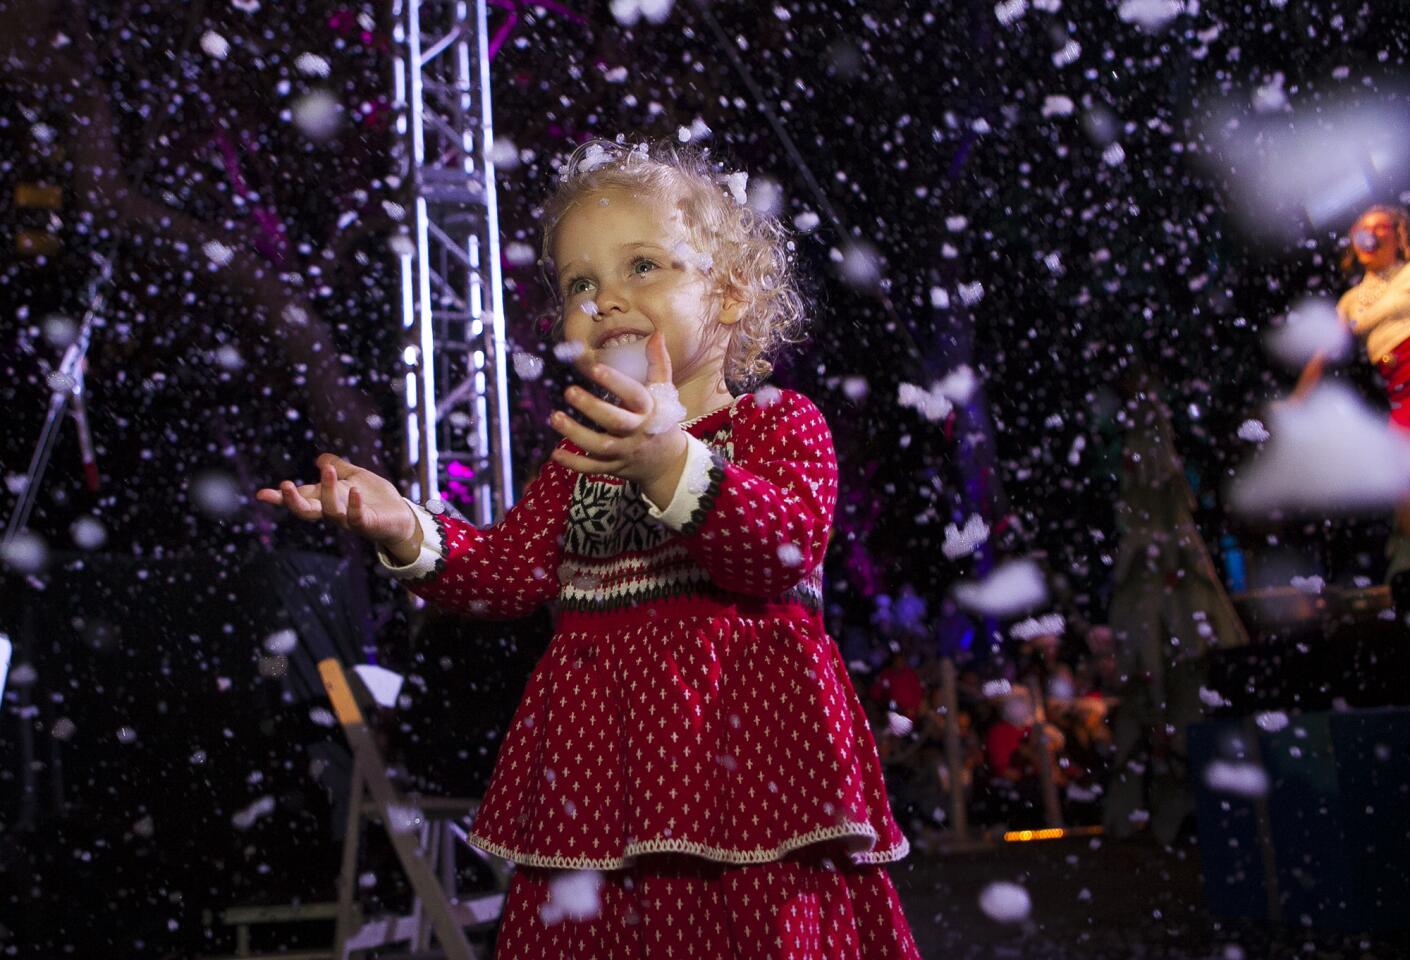 Avery Aguirre, 2, admires the snow at the event.